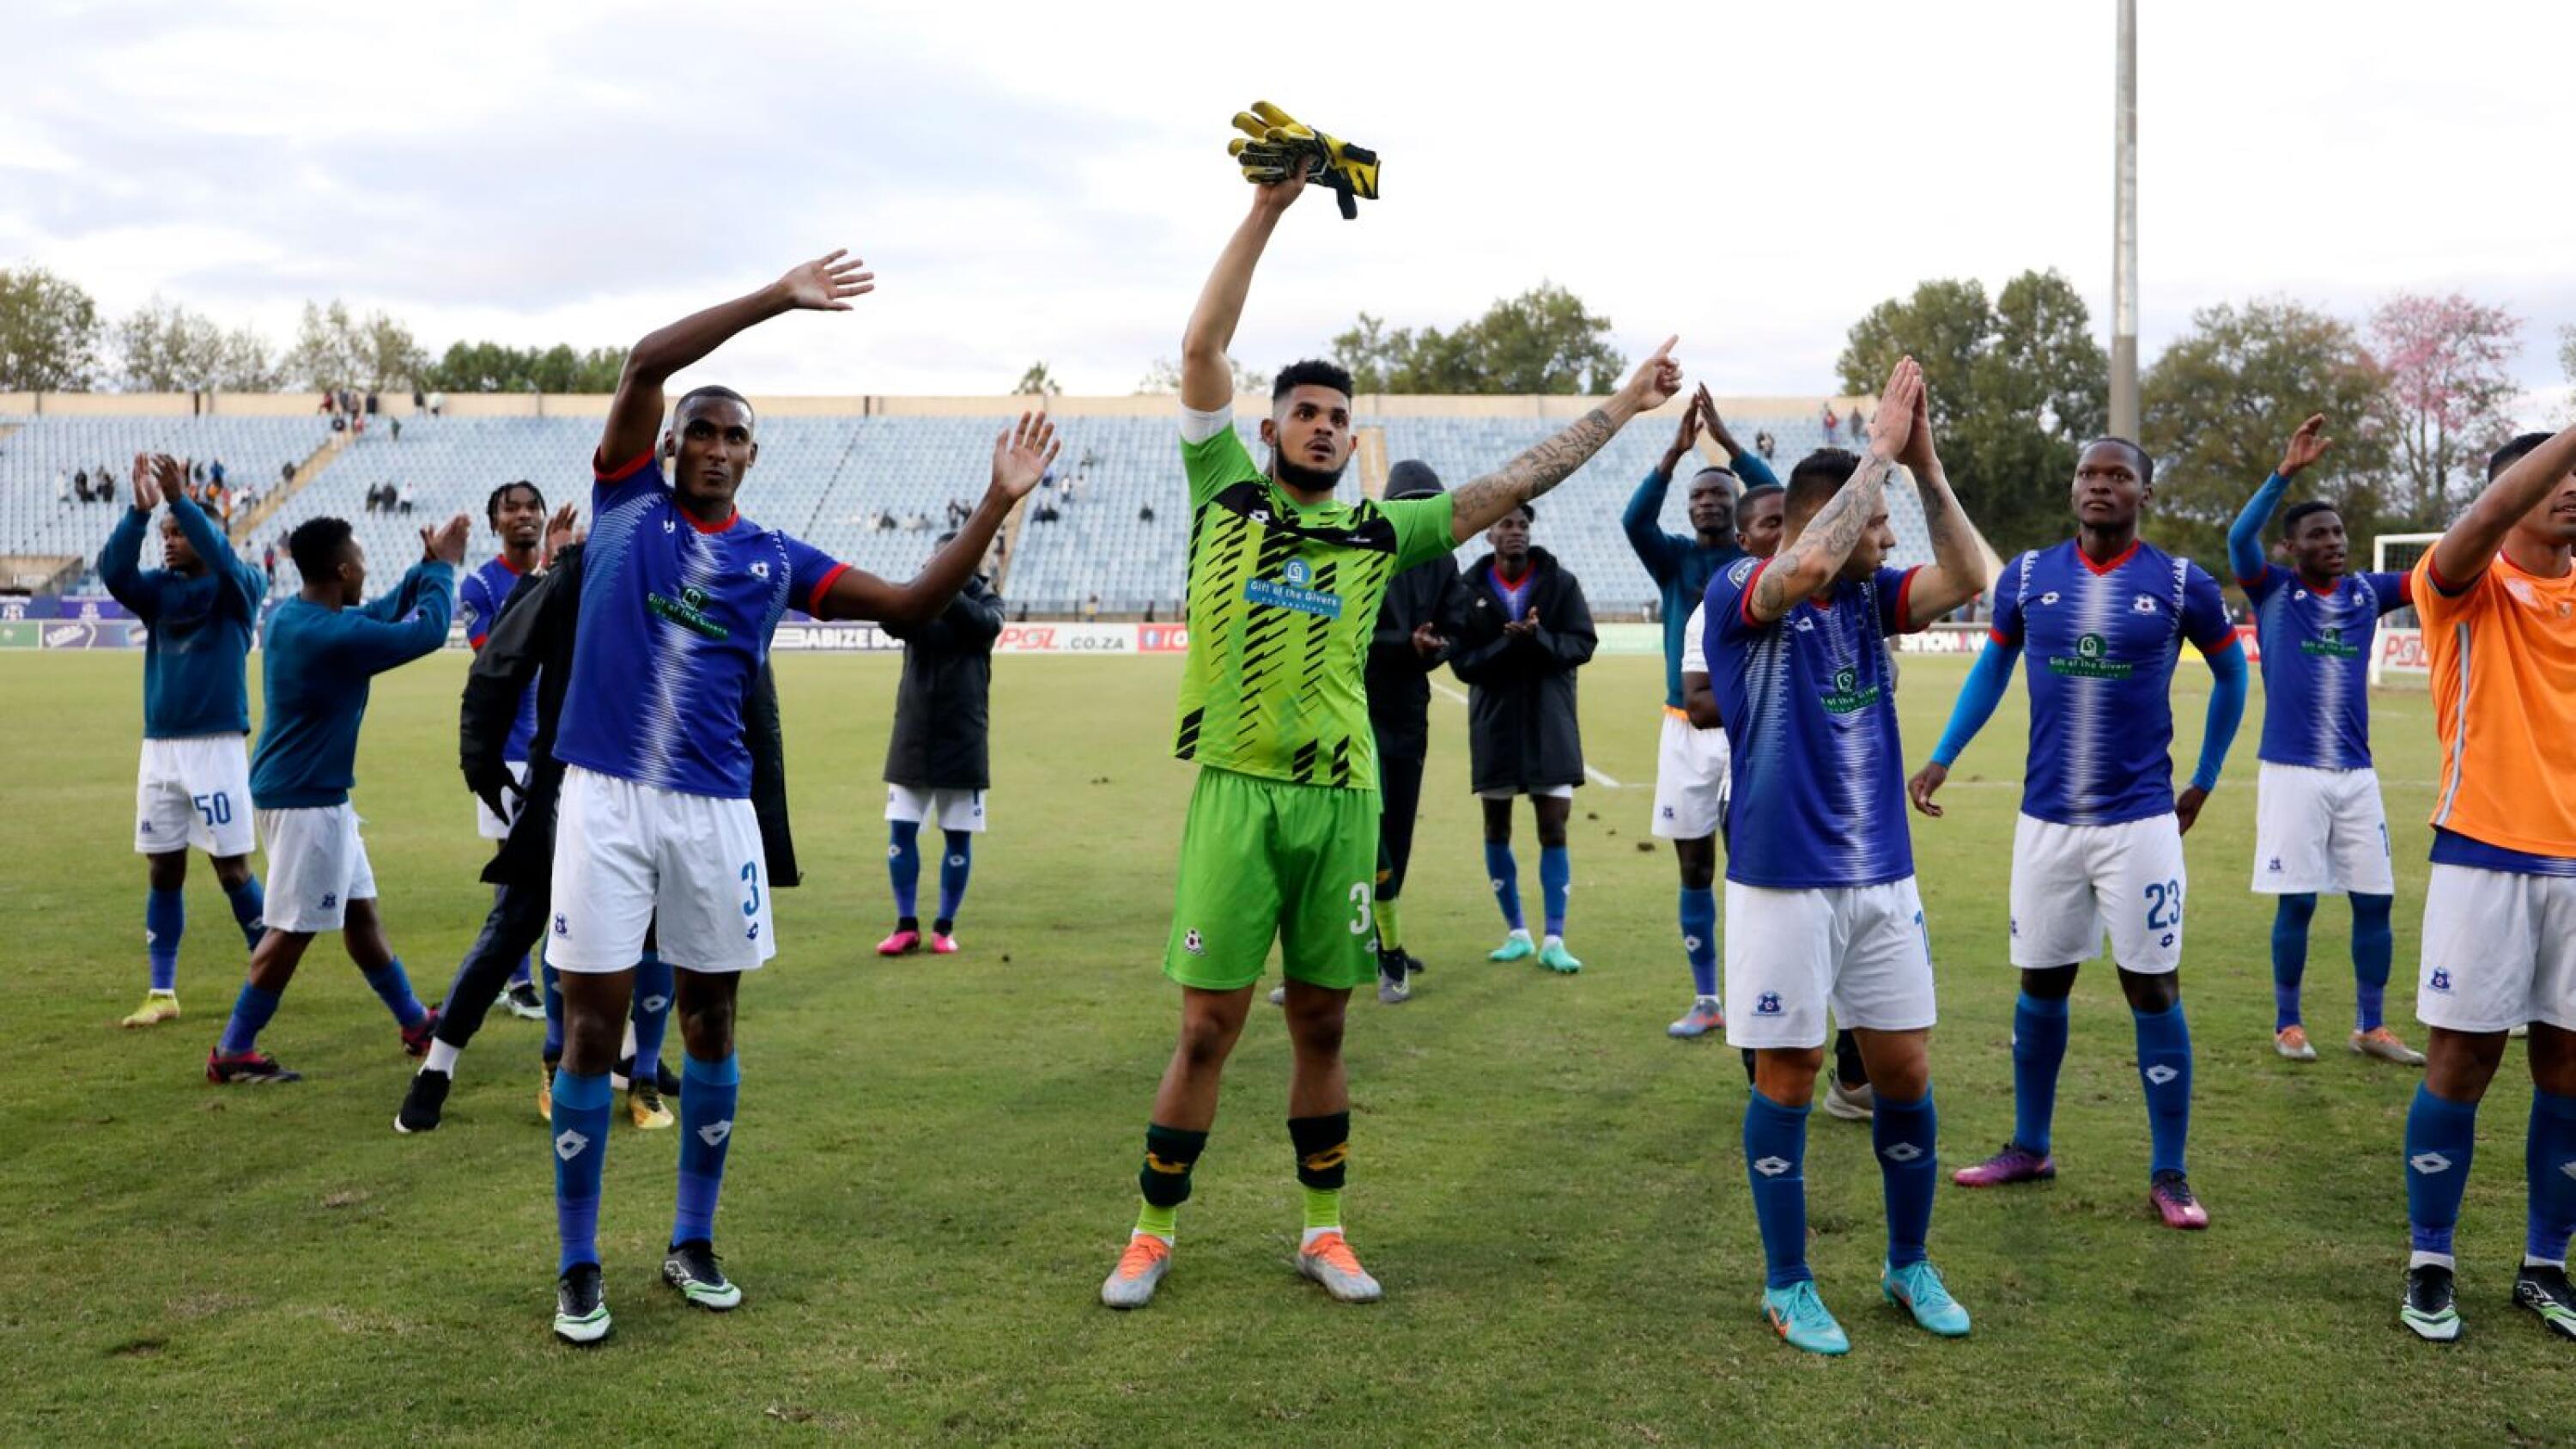 Maritzburg will have their work cut out for them at Loftus on Tuesday.